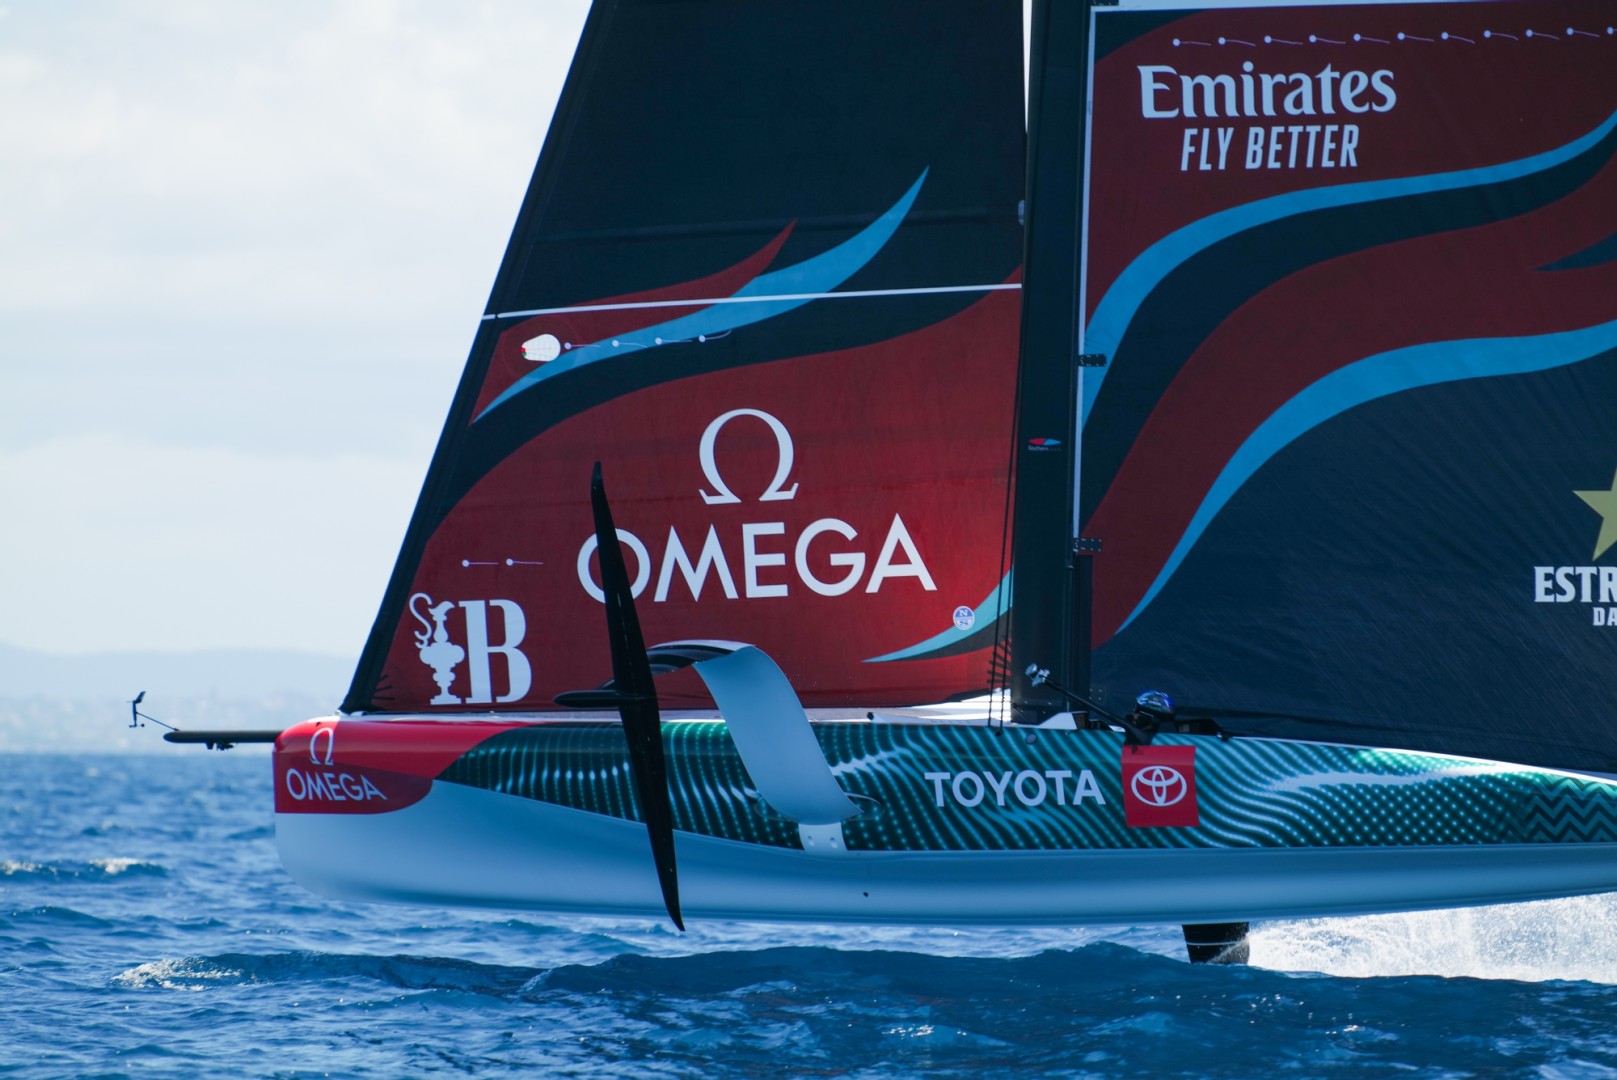 America's Cup, Kiwis hone Technique in mint conditions